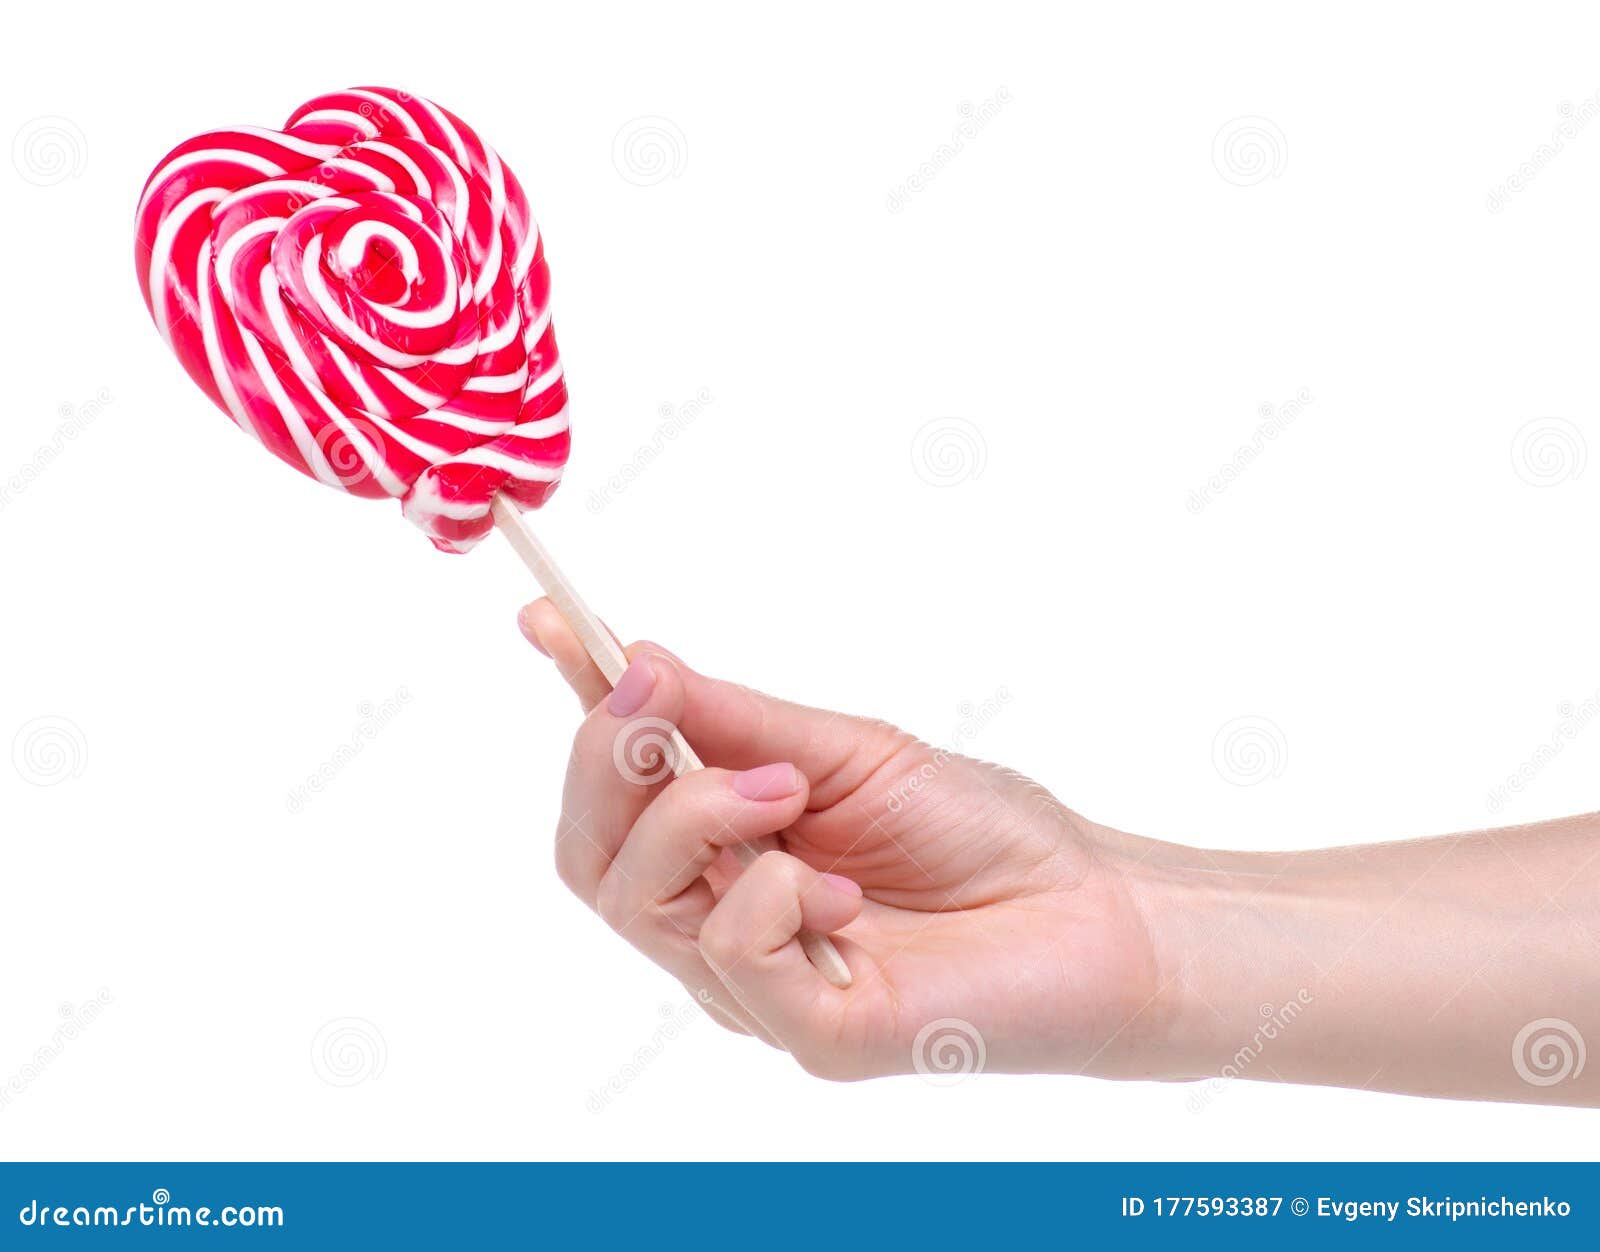 Candy Lollipop Heart in Hand Stock Image - Image of heart, lolly: 177593387